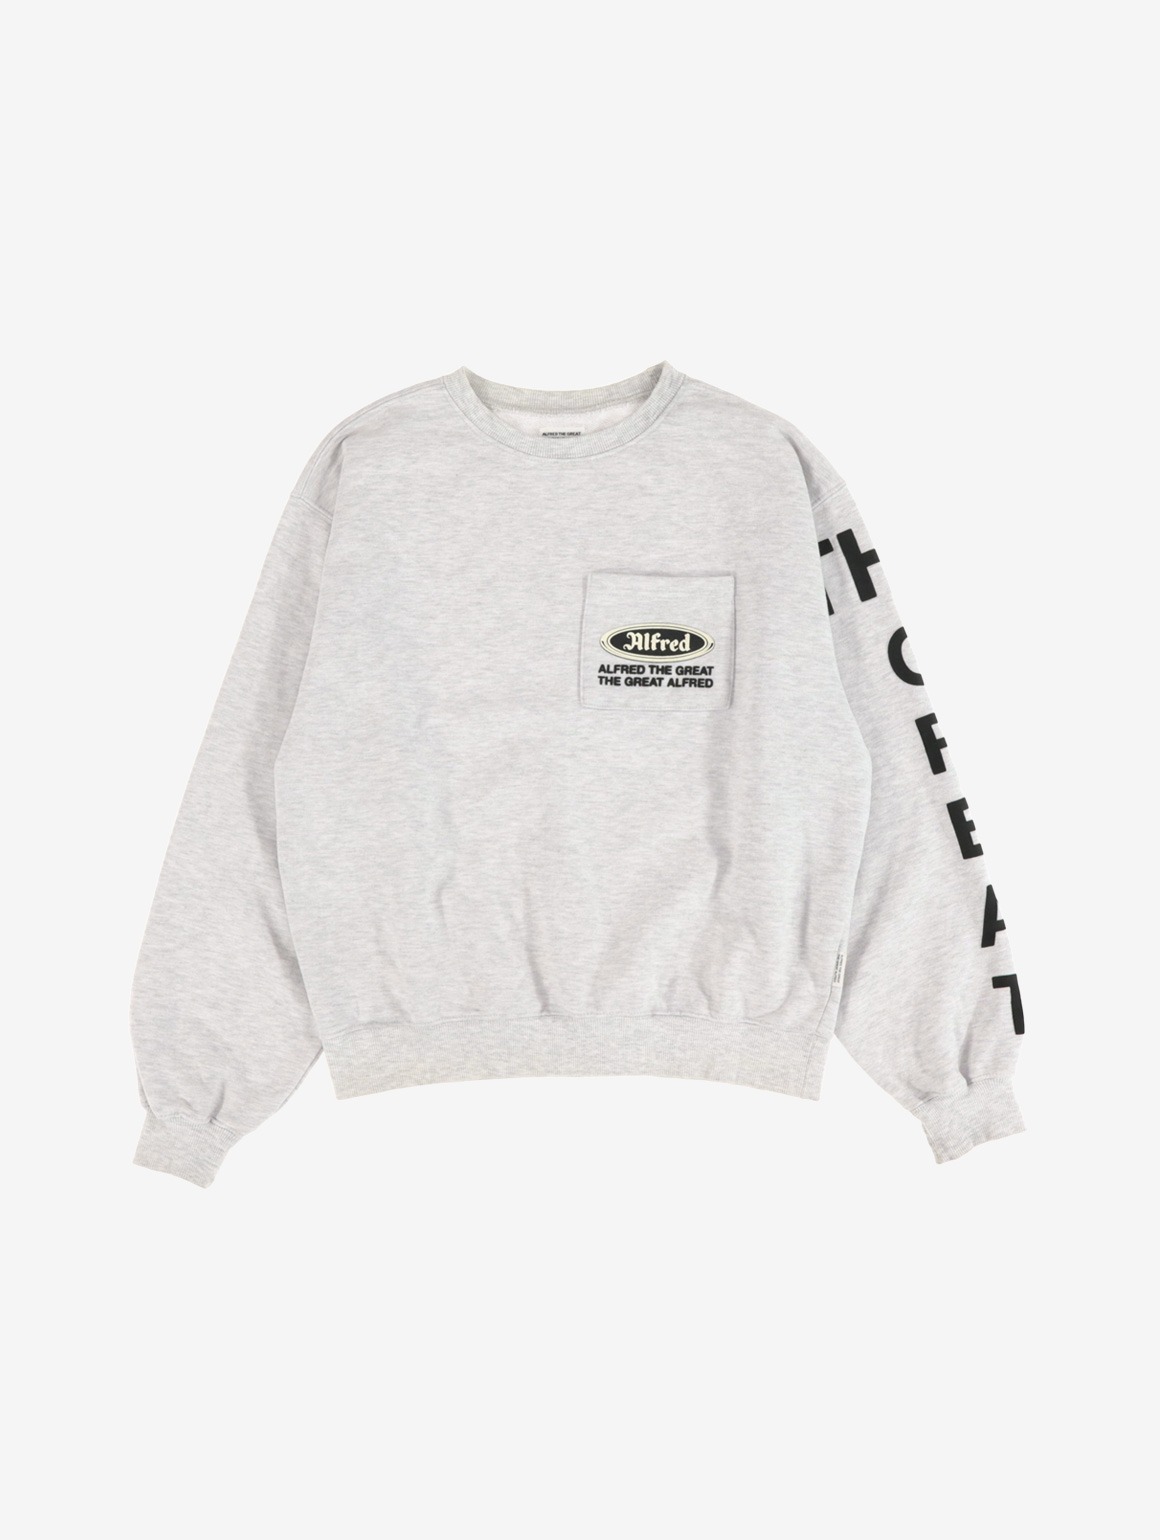 FRED THE GREAT CREWNECK